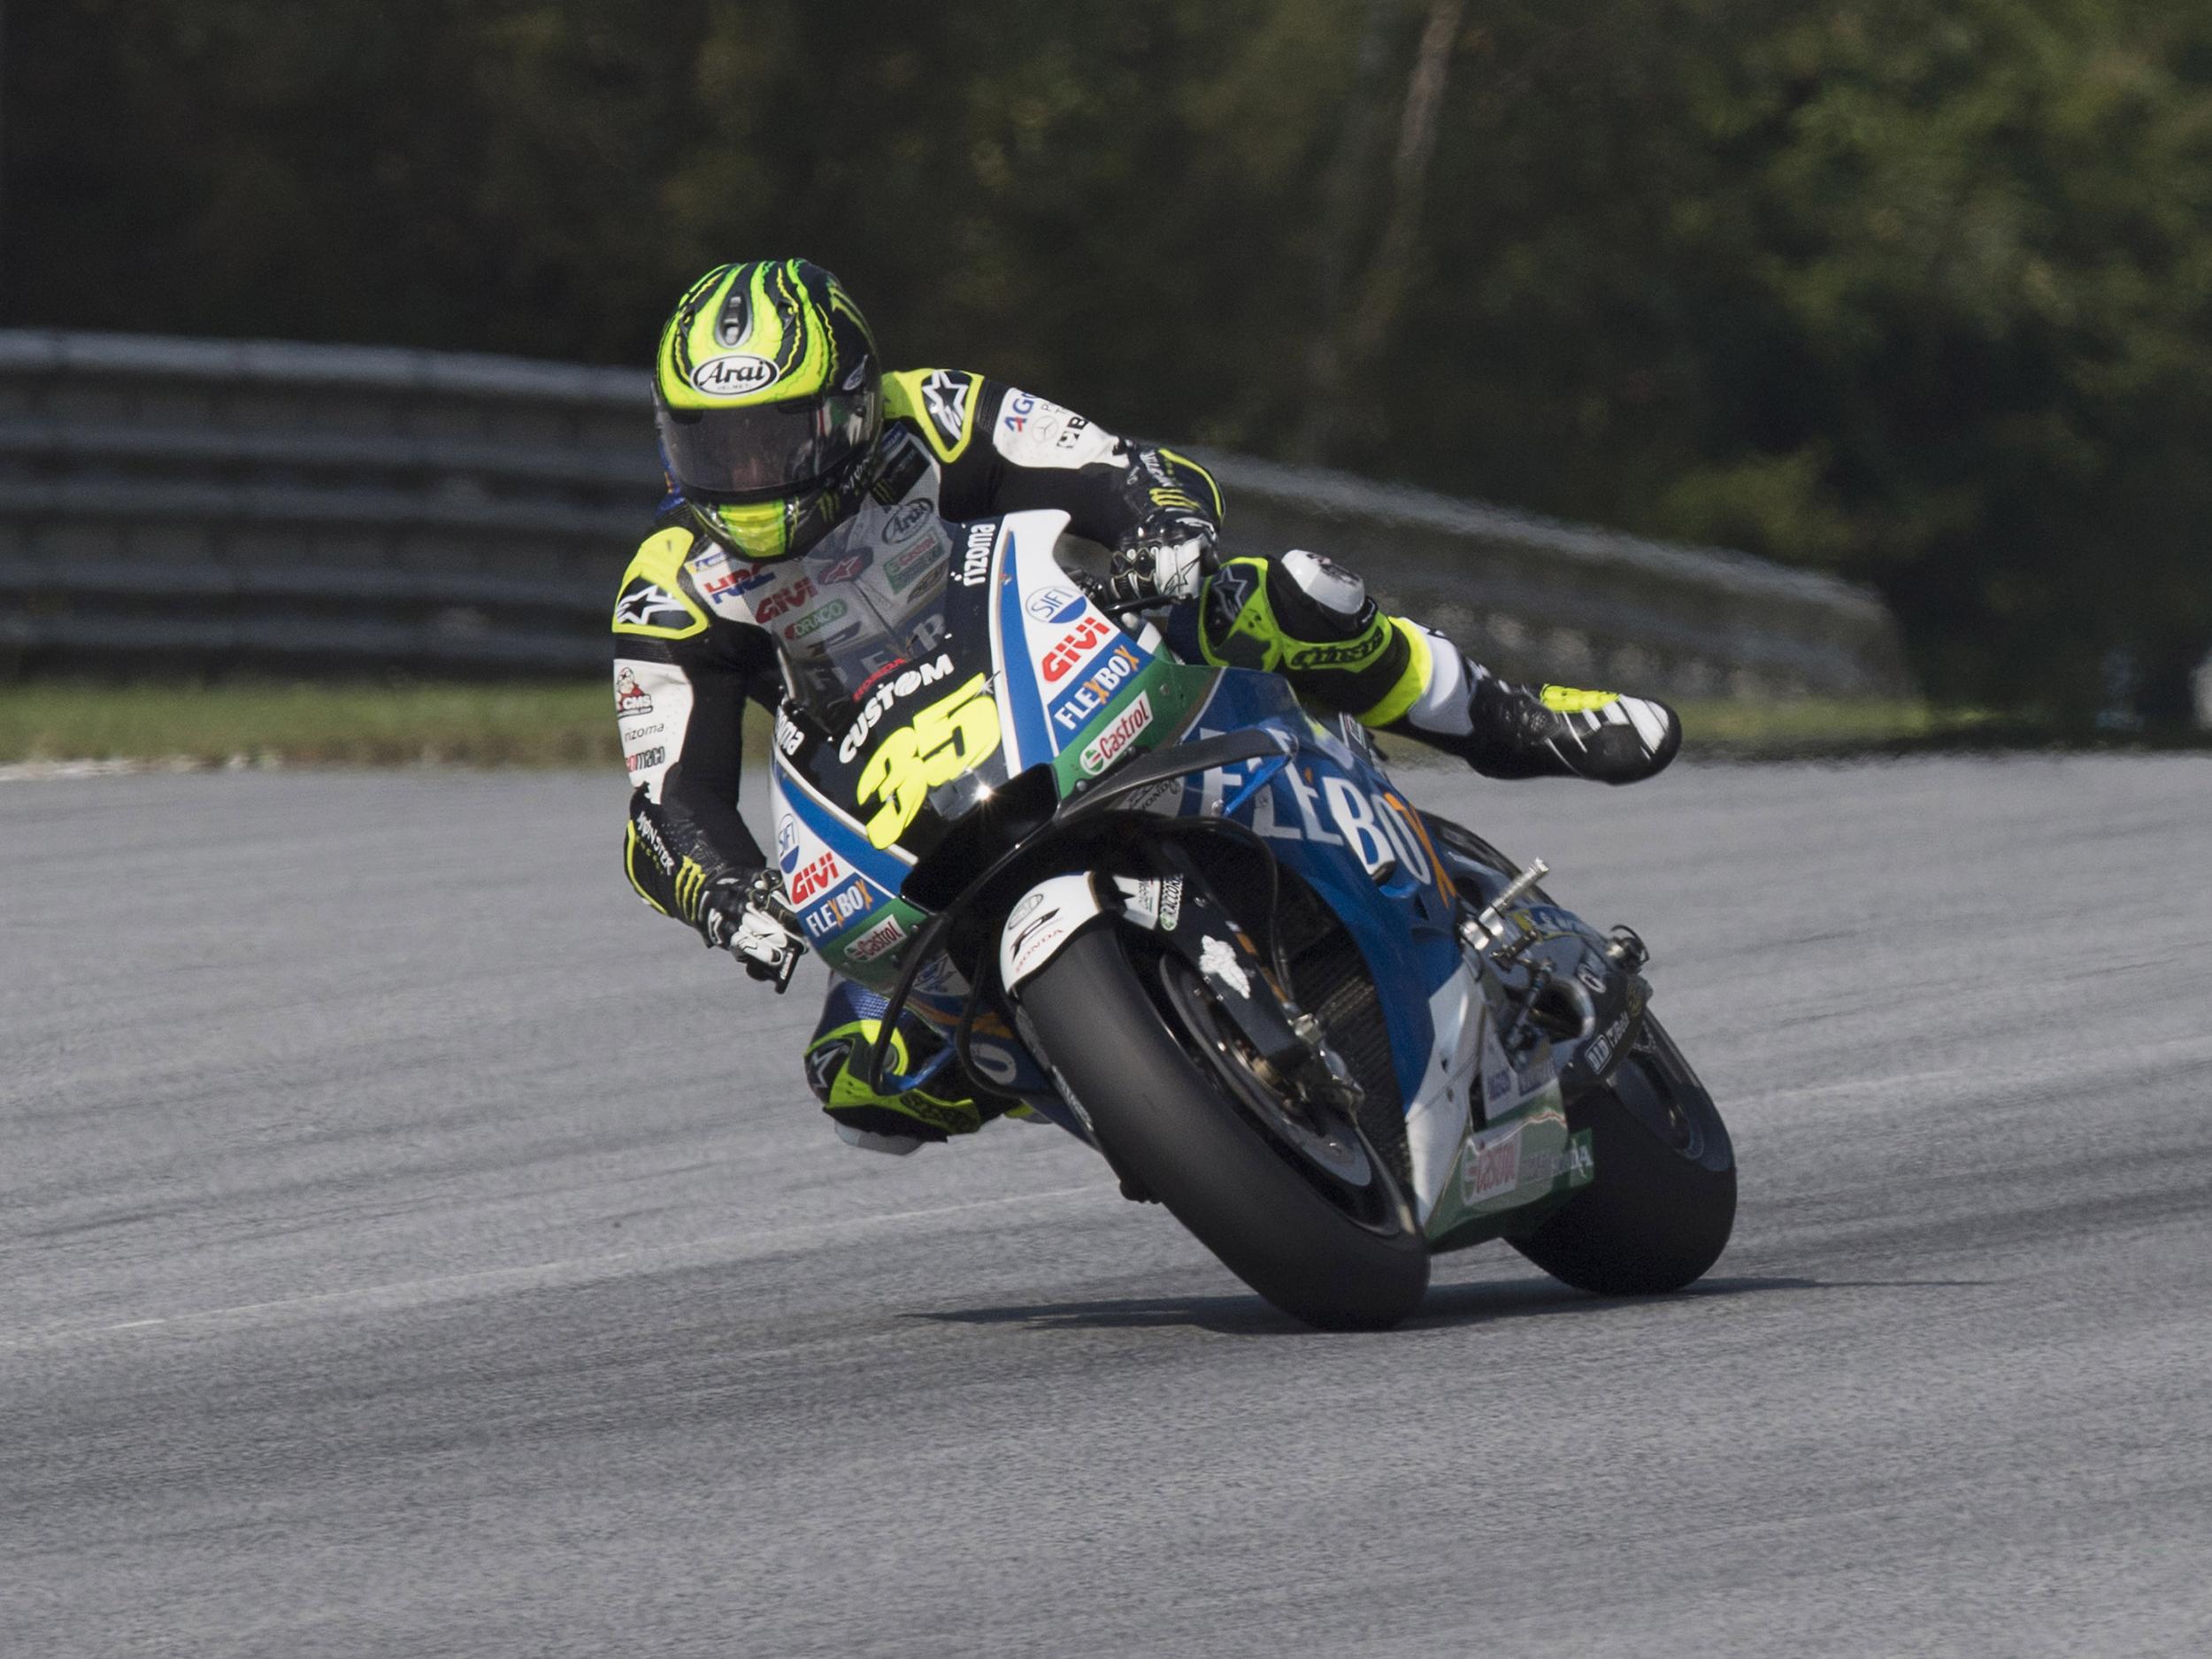 Crutchlow is starting to put family first